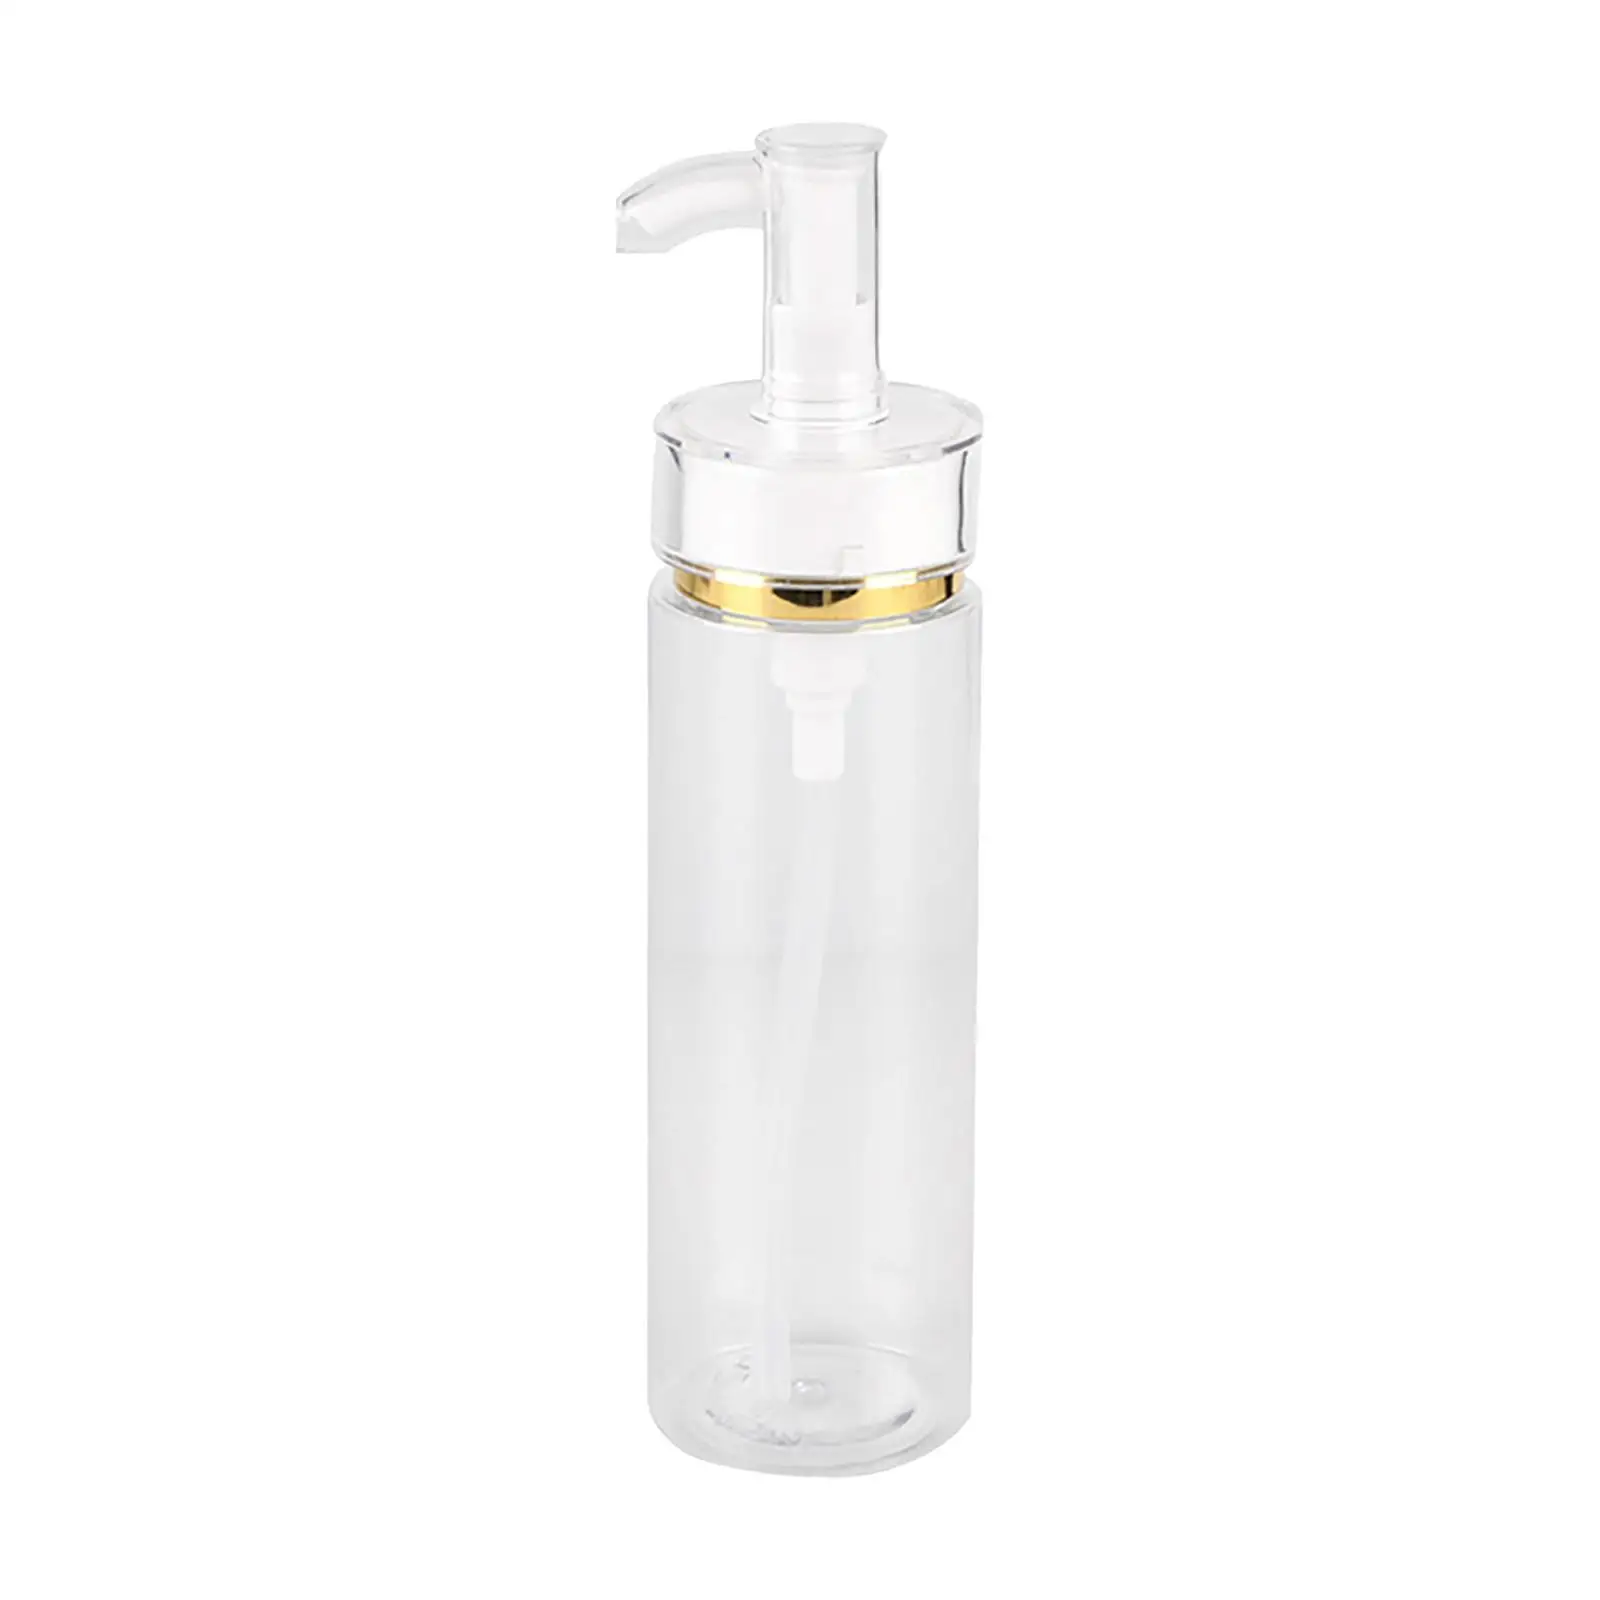 150ml Lotion Bottles with Pumps Clear Portable Refillable Travel Container for Washing Soap Makeup Liquid Shower Shampoo